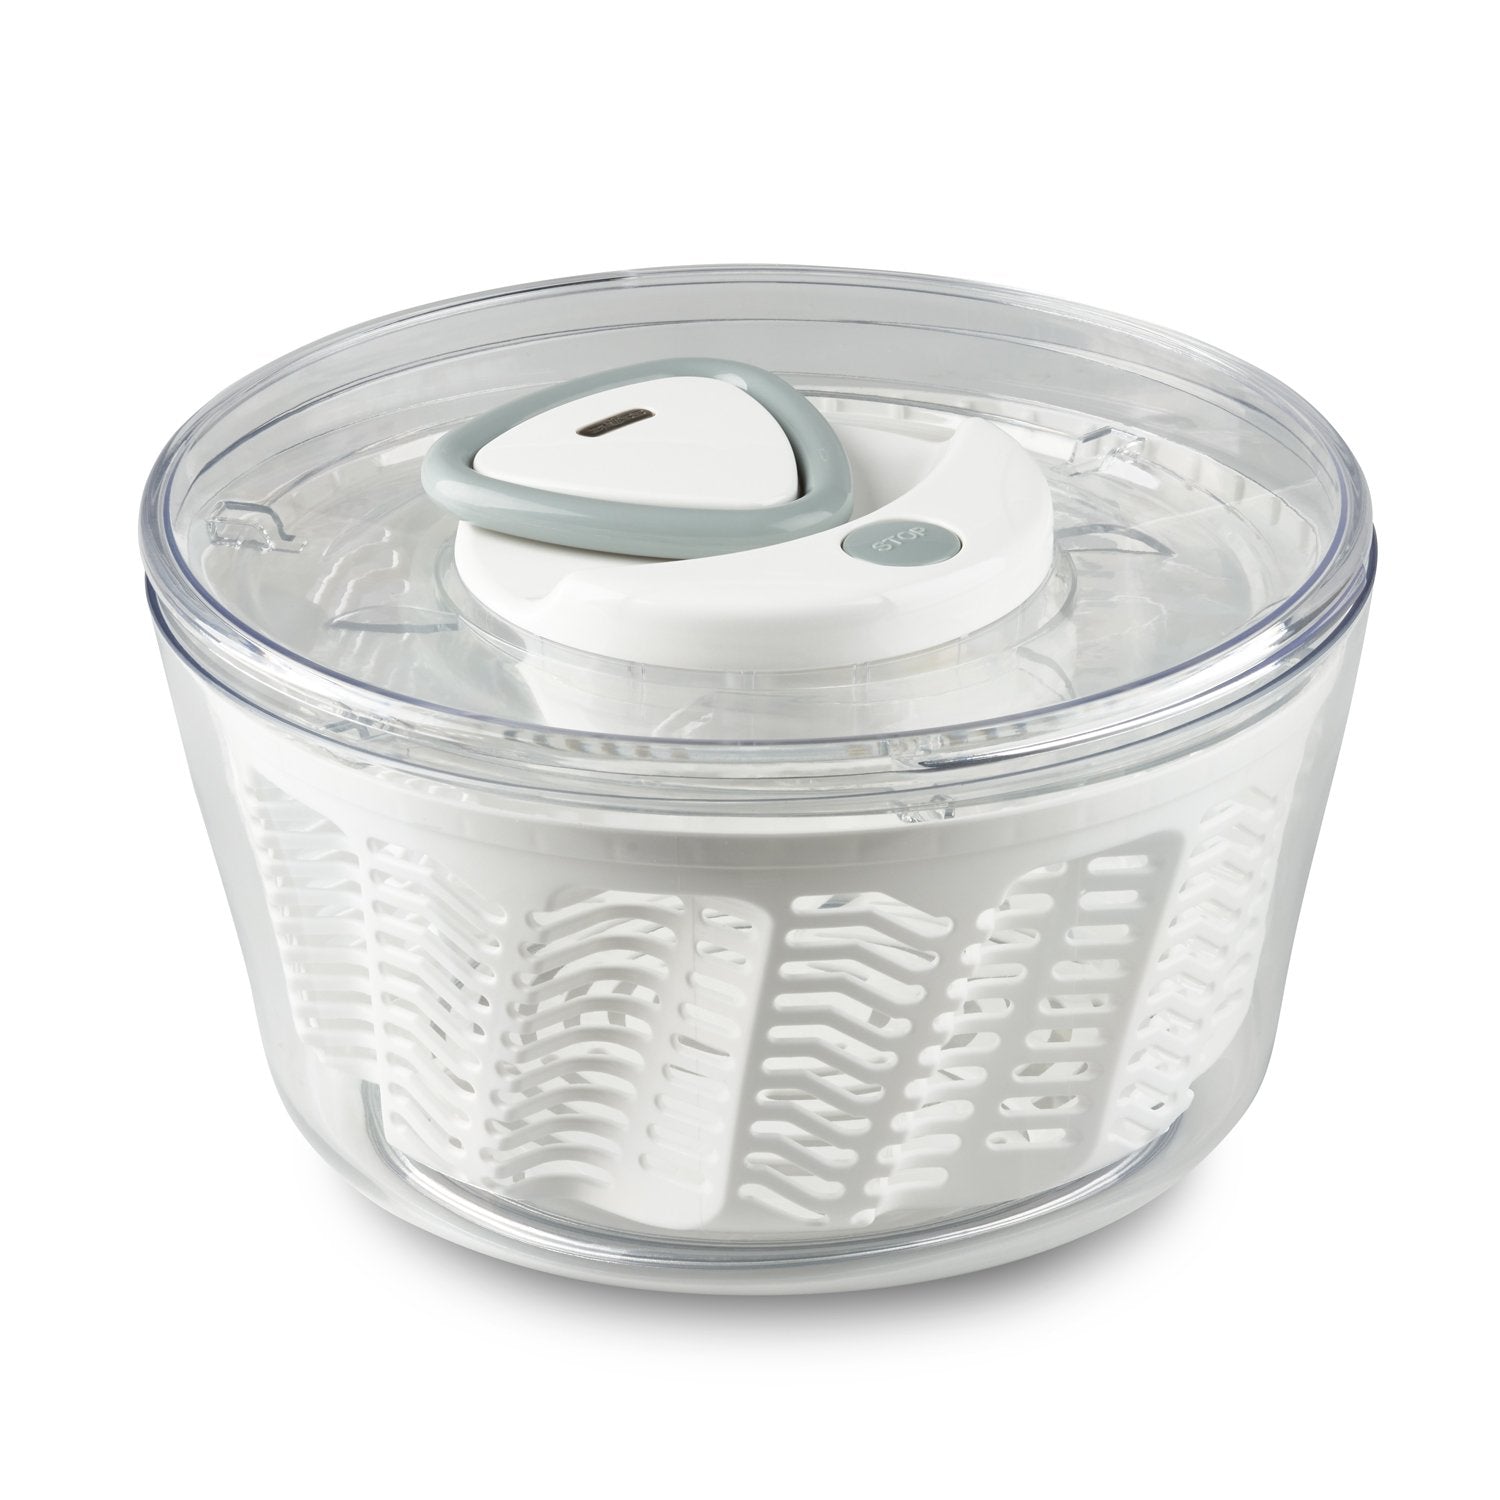 Zyliss Easy Spin 2 AquaVent Large Salad Spinner